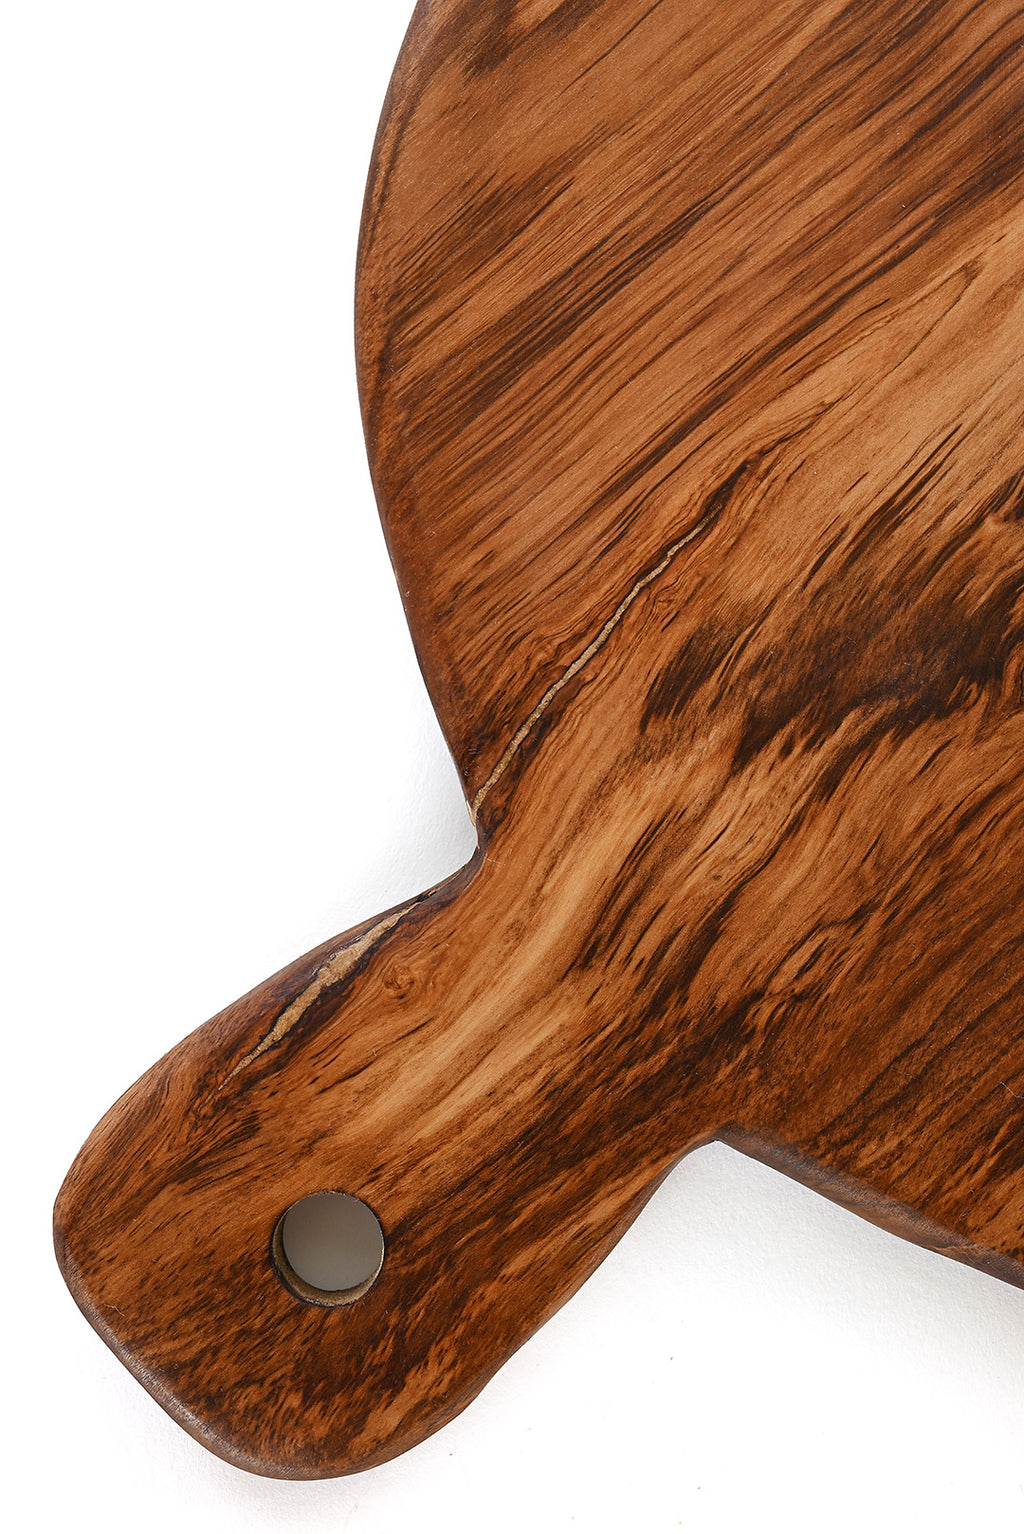 <i>Imperfect:</i> Wild Olive Wood Round Cheese Board with Handle